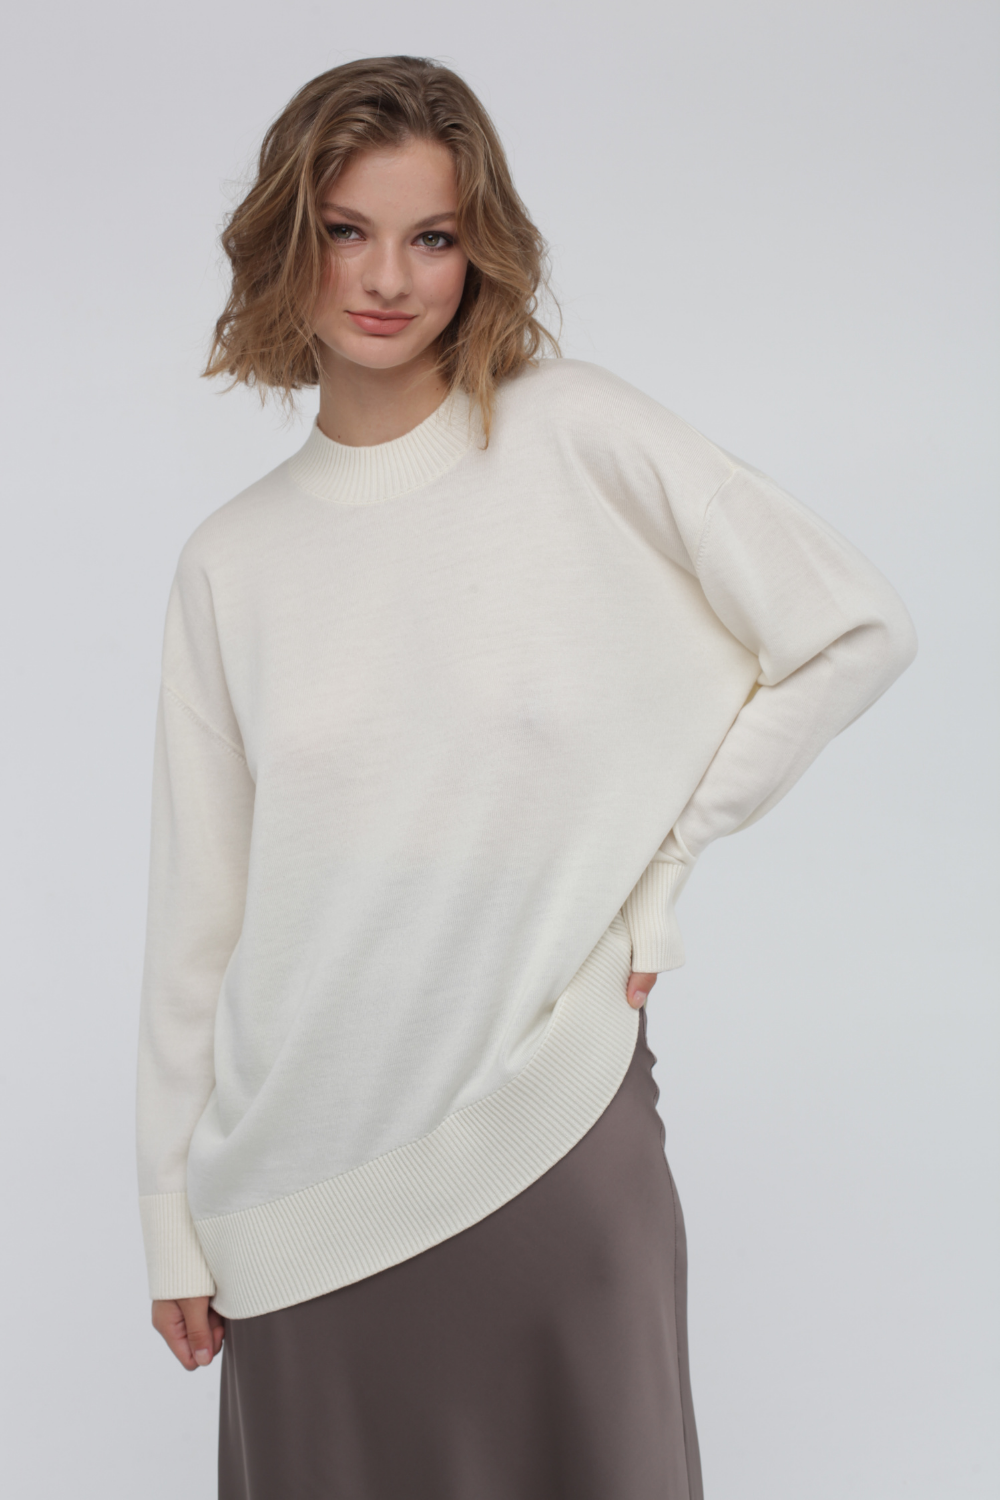 Asymmetric sweater with cutout on the back (Miss Secret) PU-017